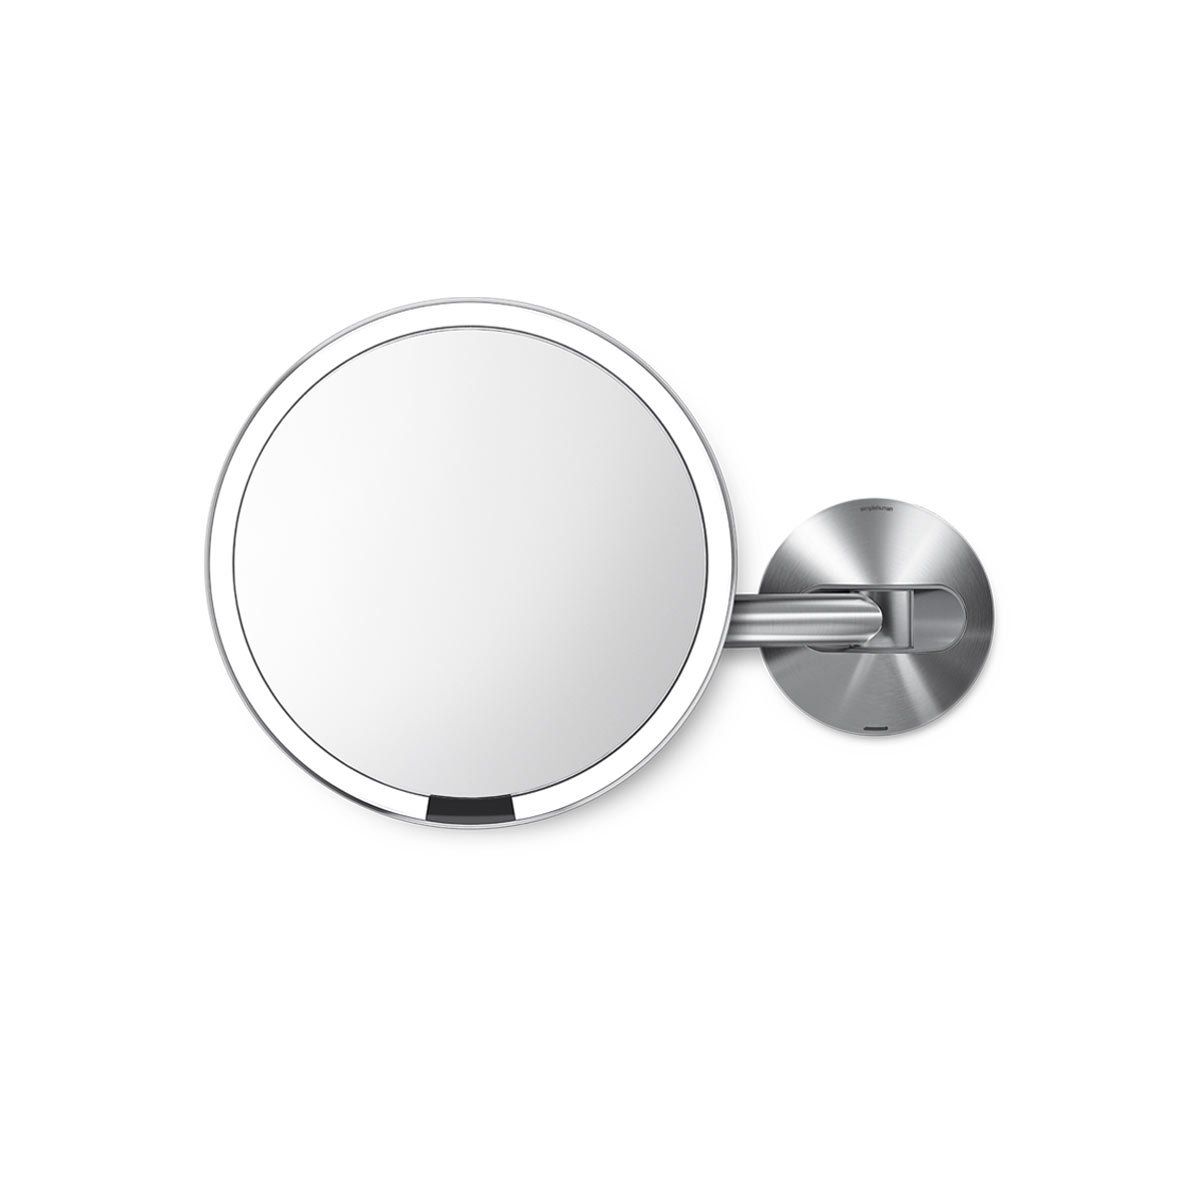 10 Best Lighted Makeup Mirrors 2021, Best Lighted Magnifying Makeup Mirror 2021